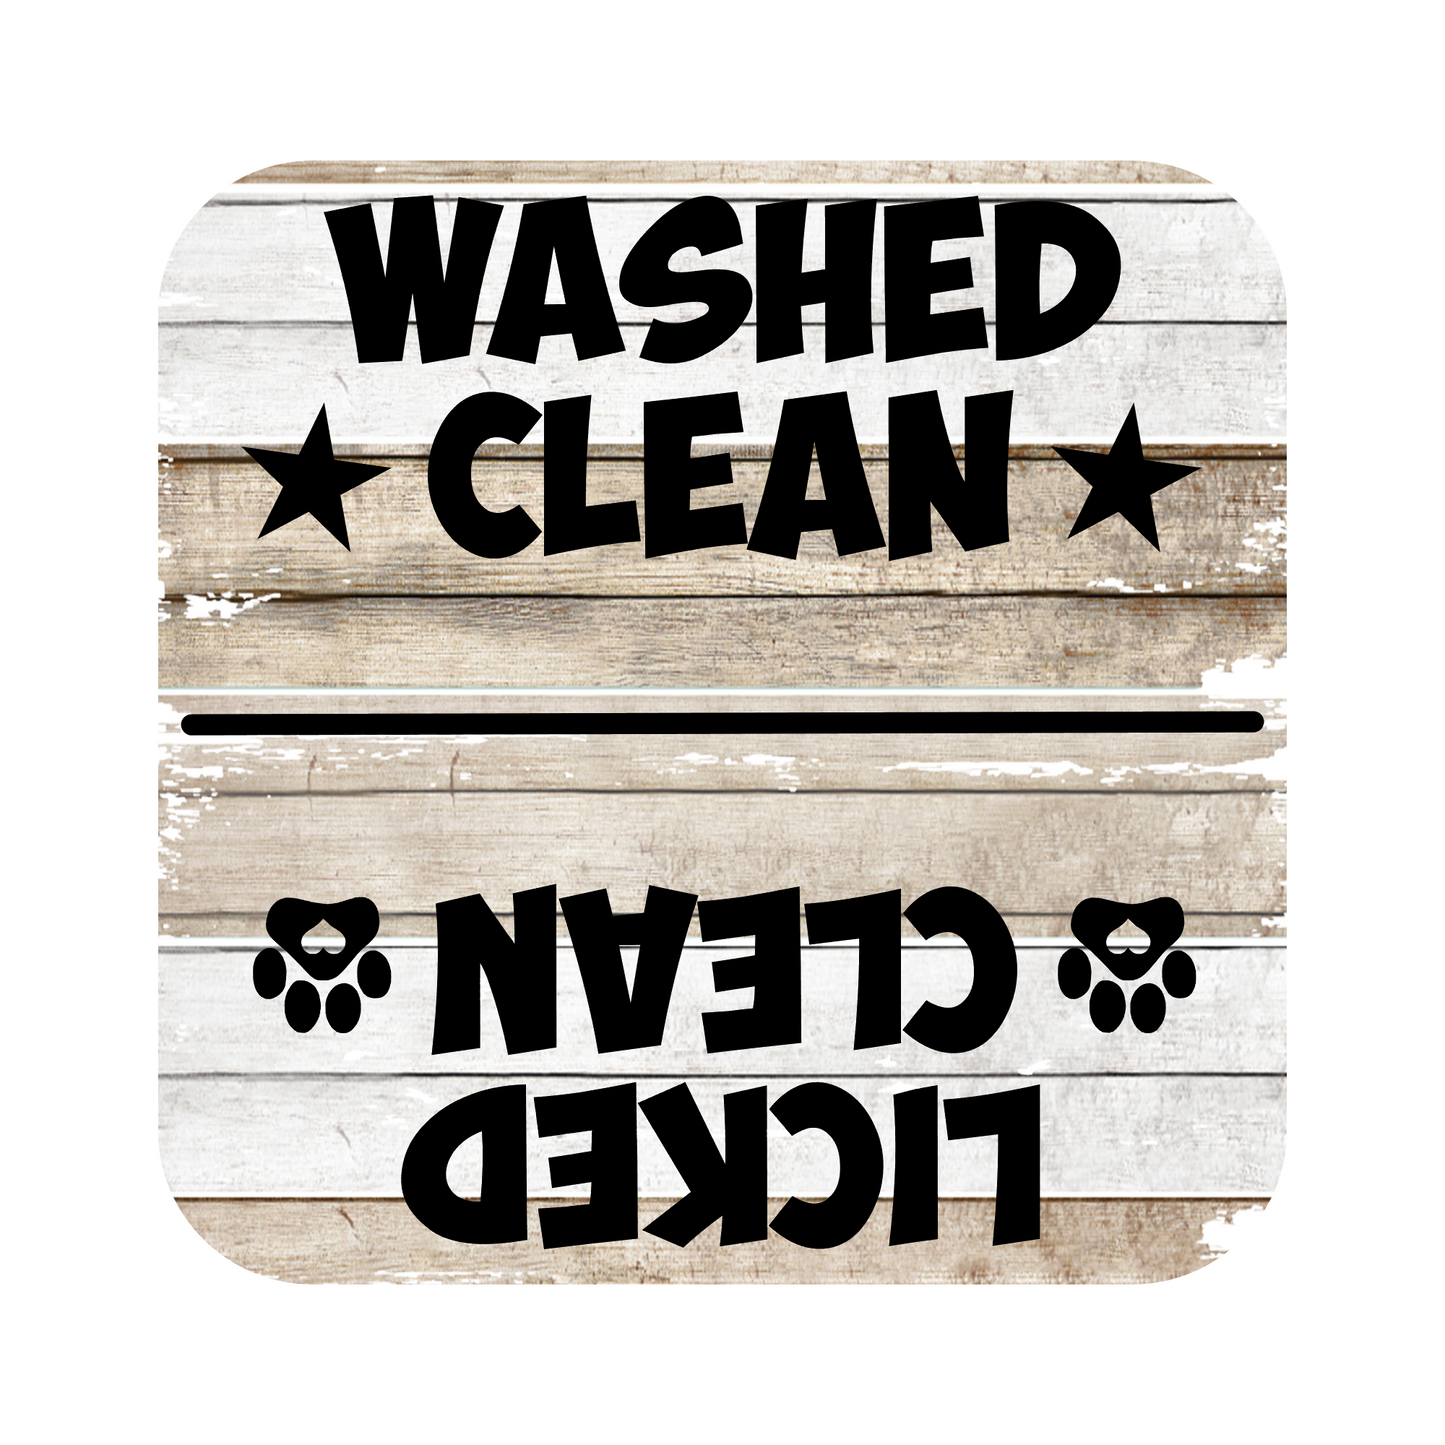 Dishwasher Washed Clean/Licked Clean Magnet